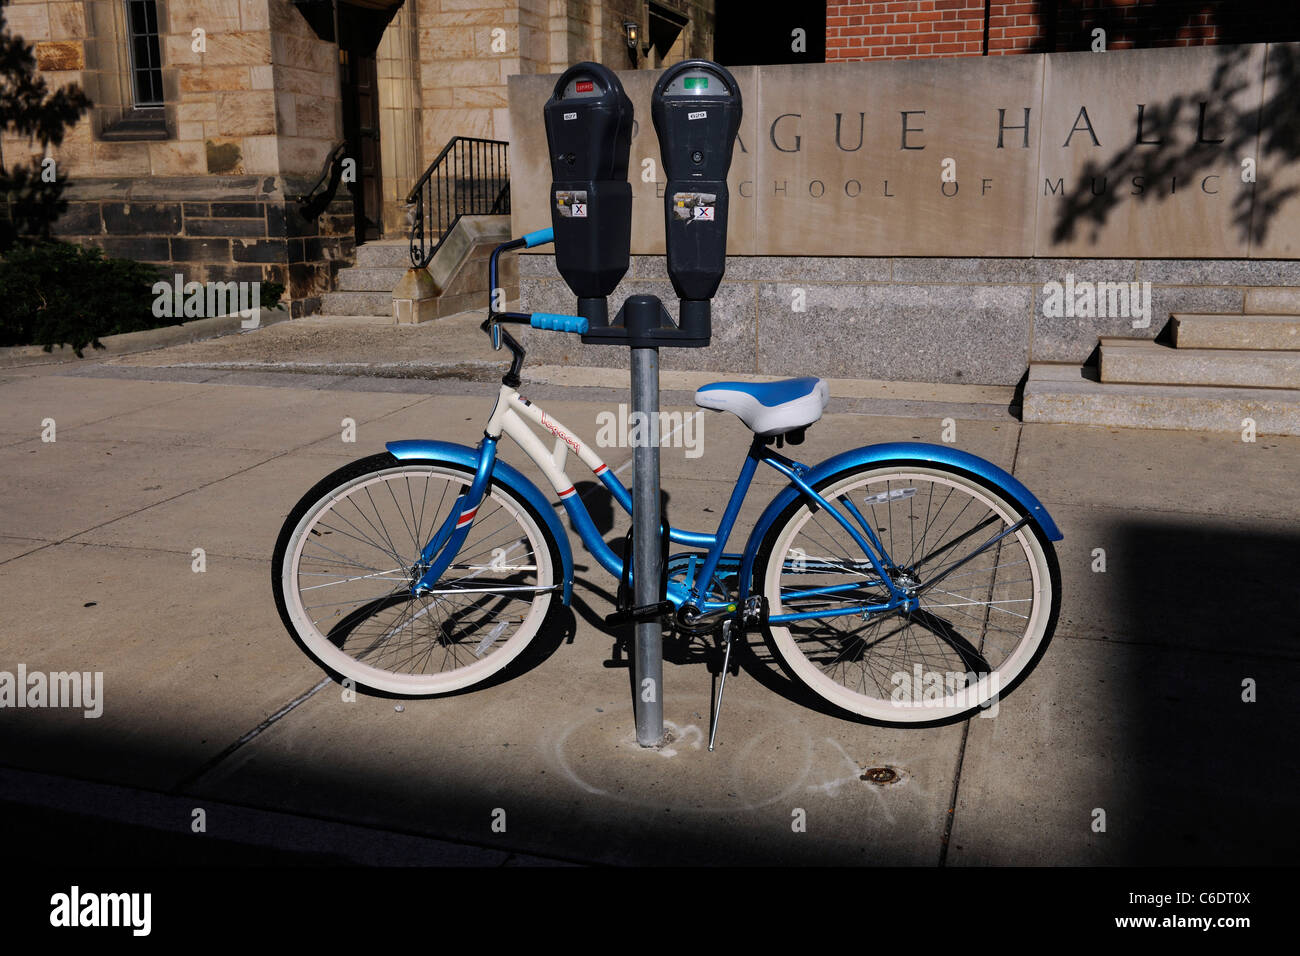 Commuter bike locked to parking meter. New Haven, CT. Stock Photo